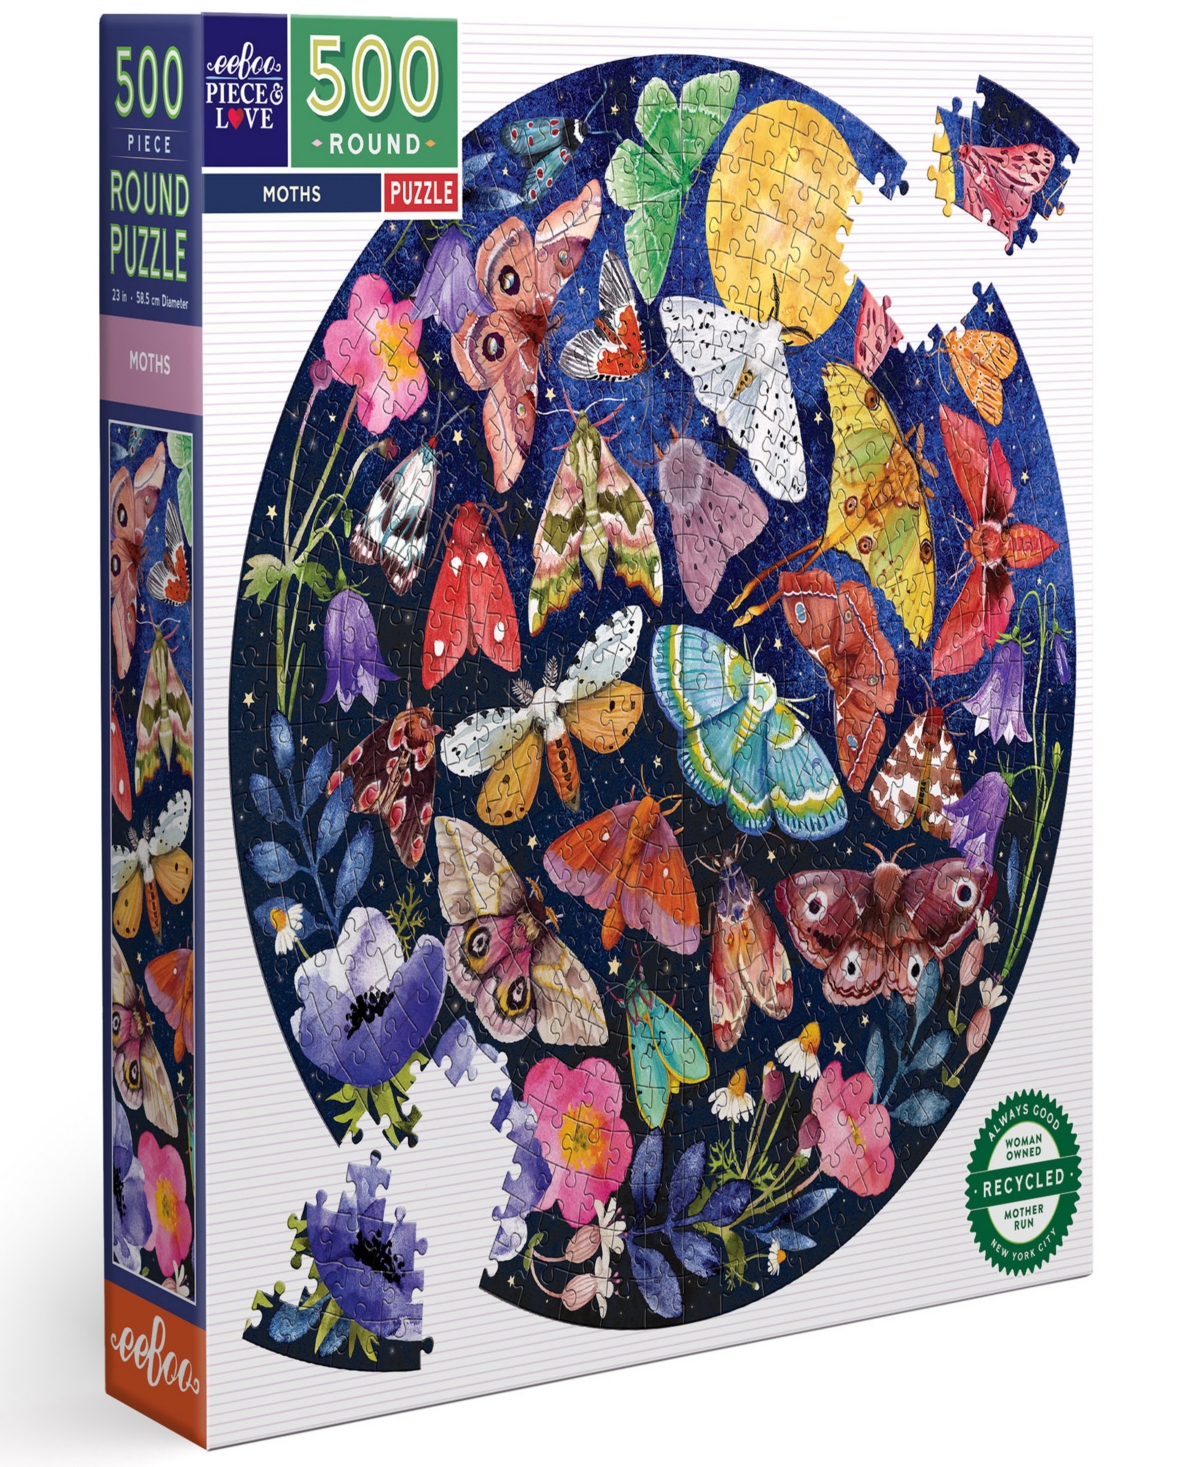 Eeboo Piece And Love Moths 500 Piece Round Adult Jigsaw Puzzle Set, Ages 14 And Up In Multi